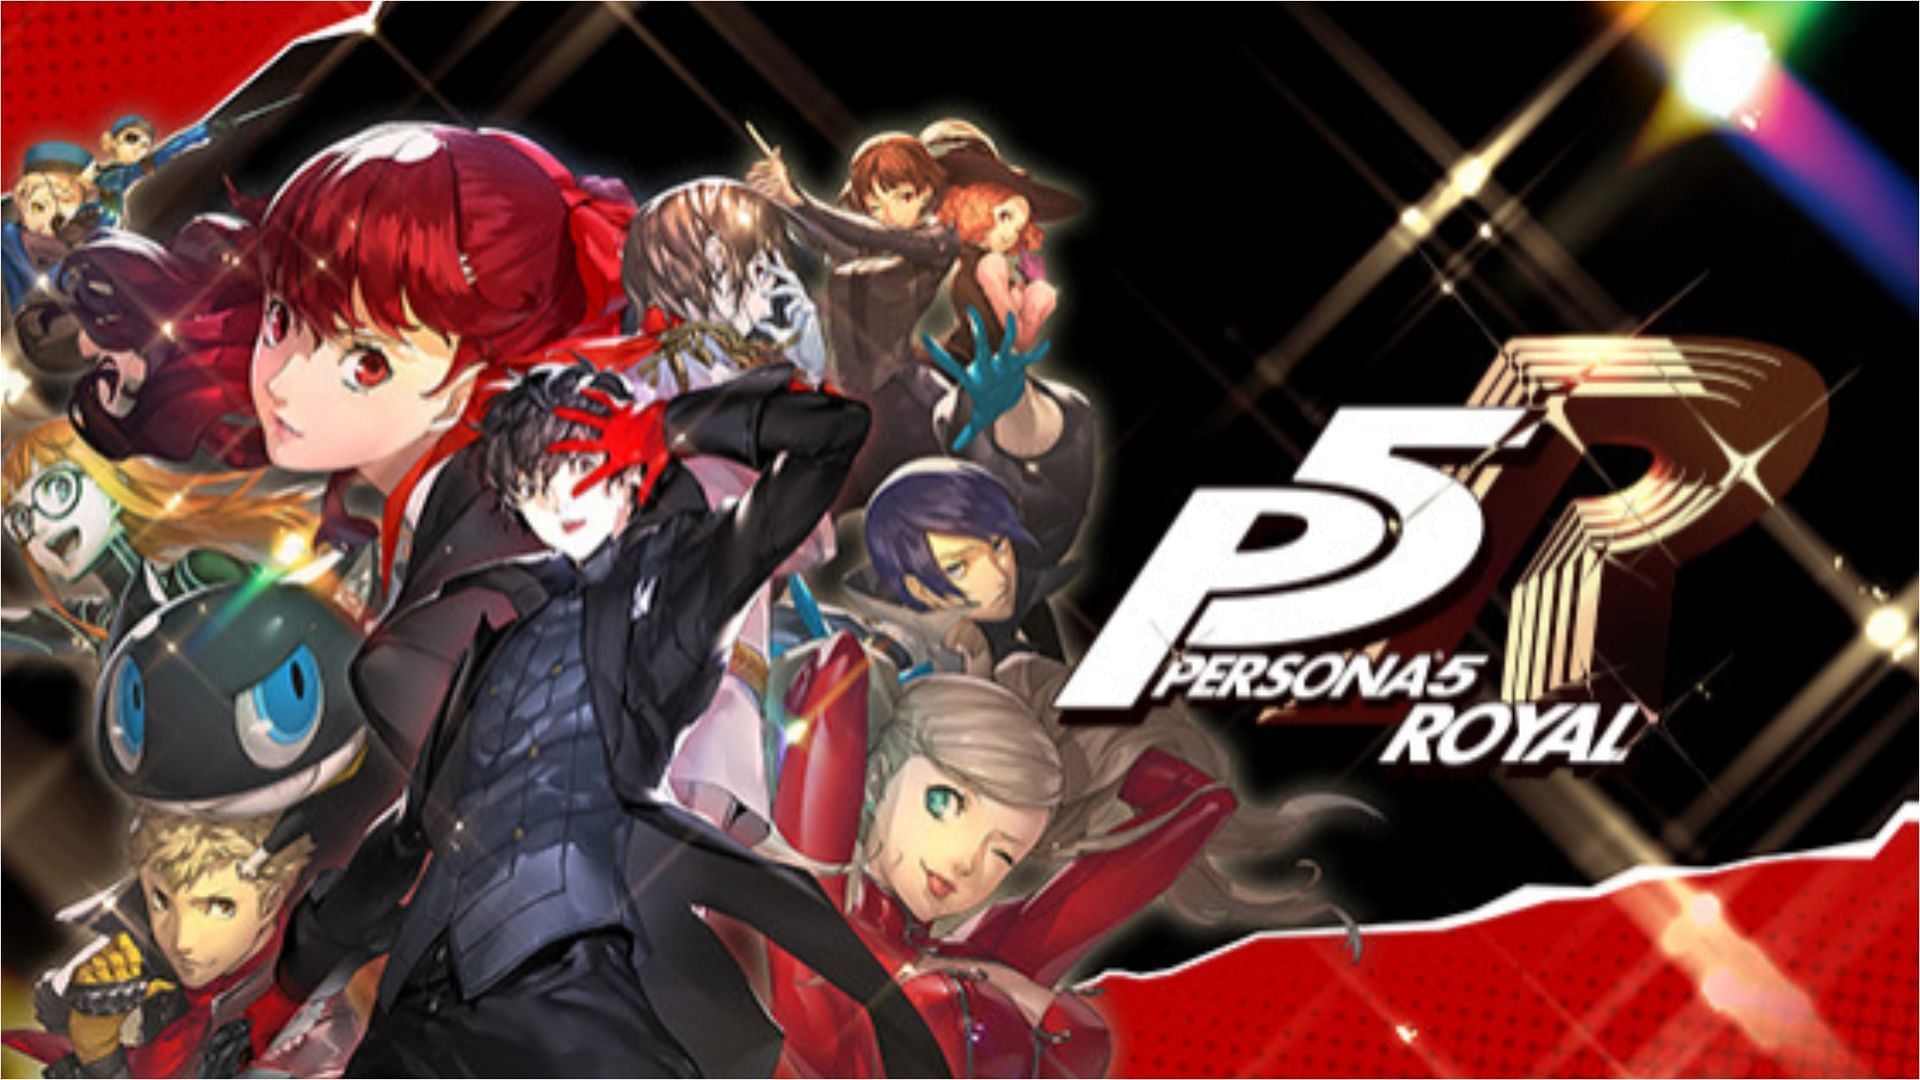 The original Persona 5 was released on PS3 and PS4 in 2016 (Image via Atlus)